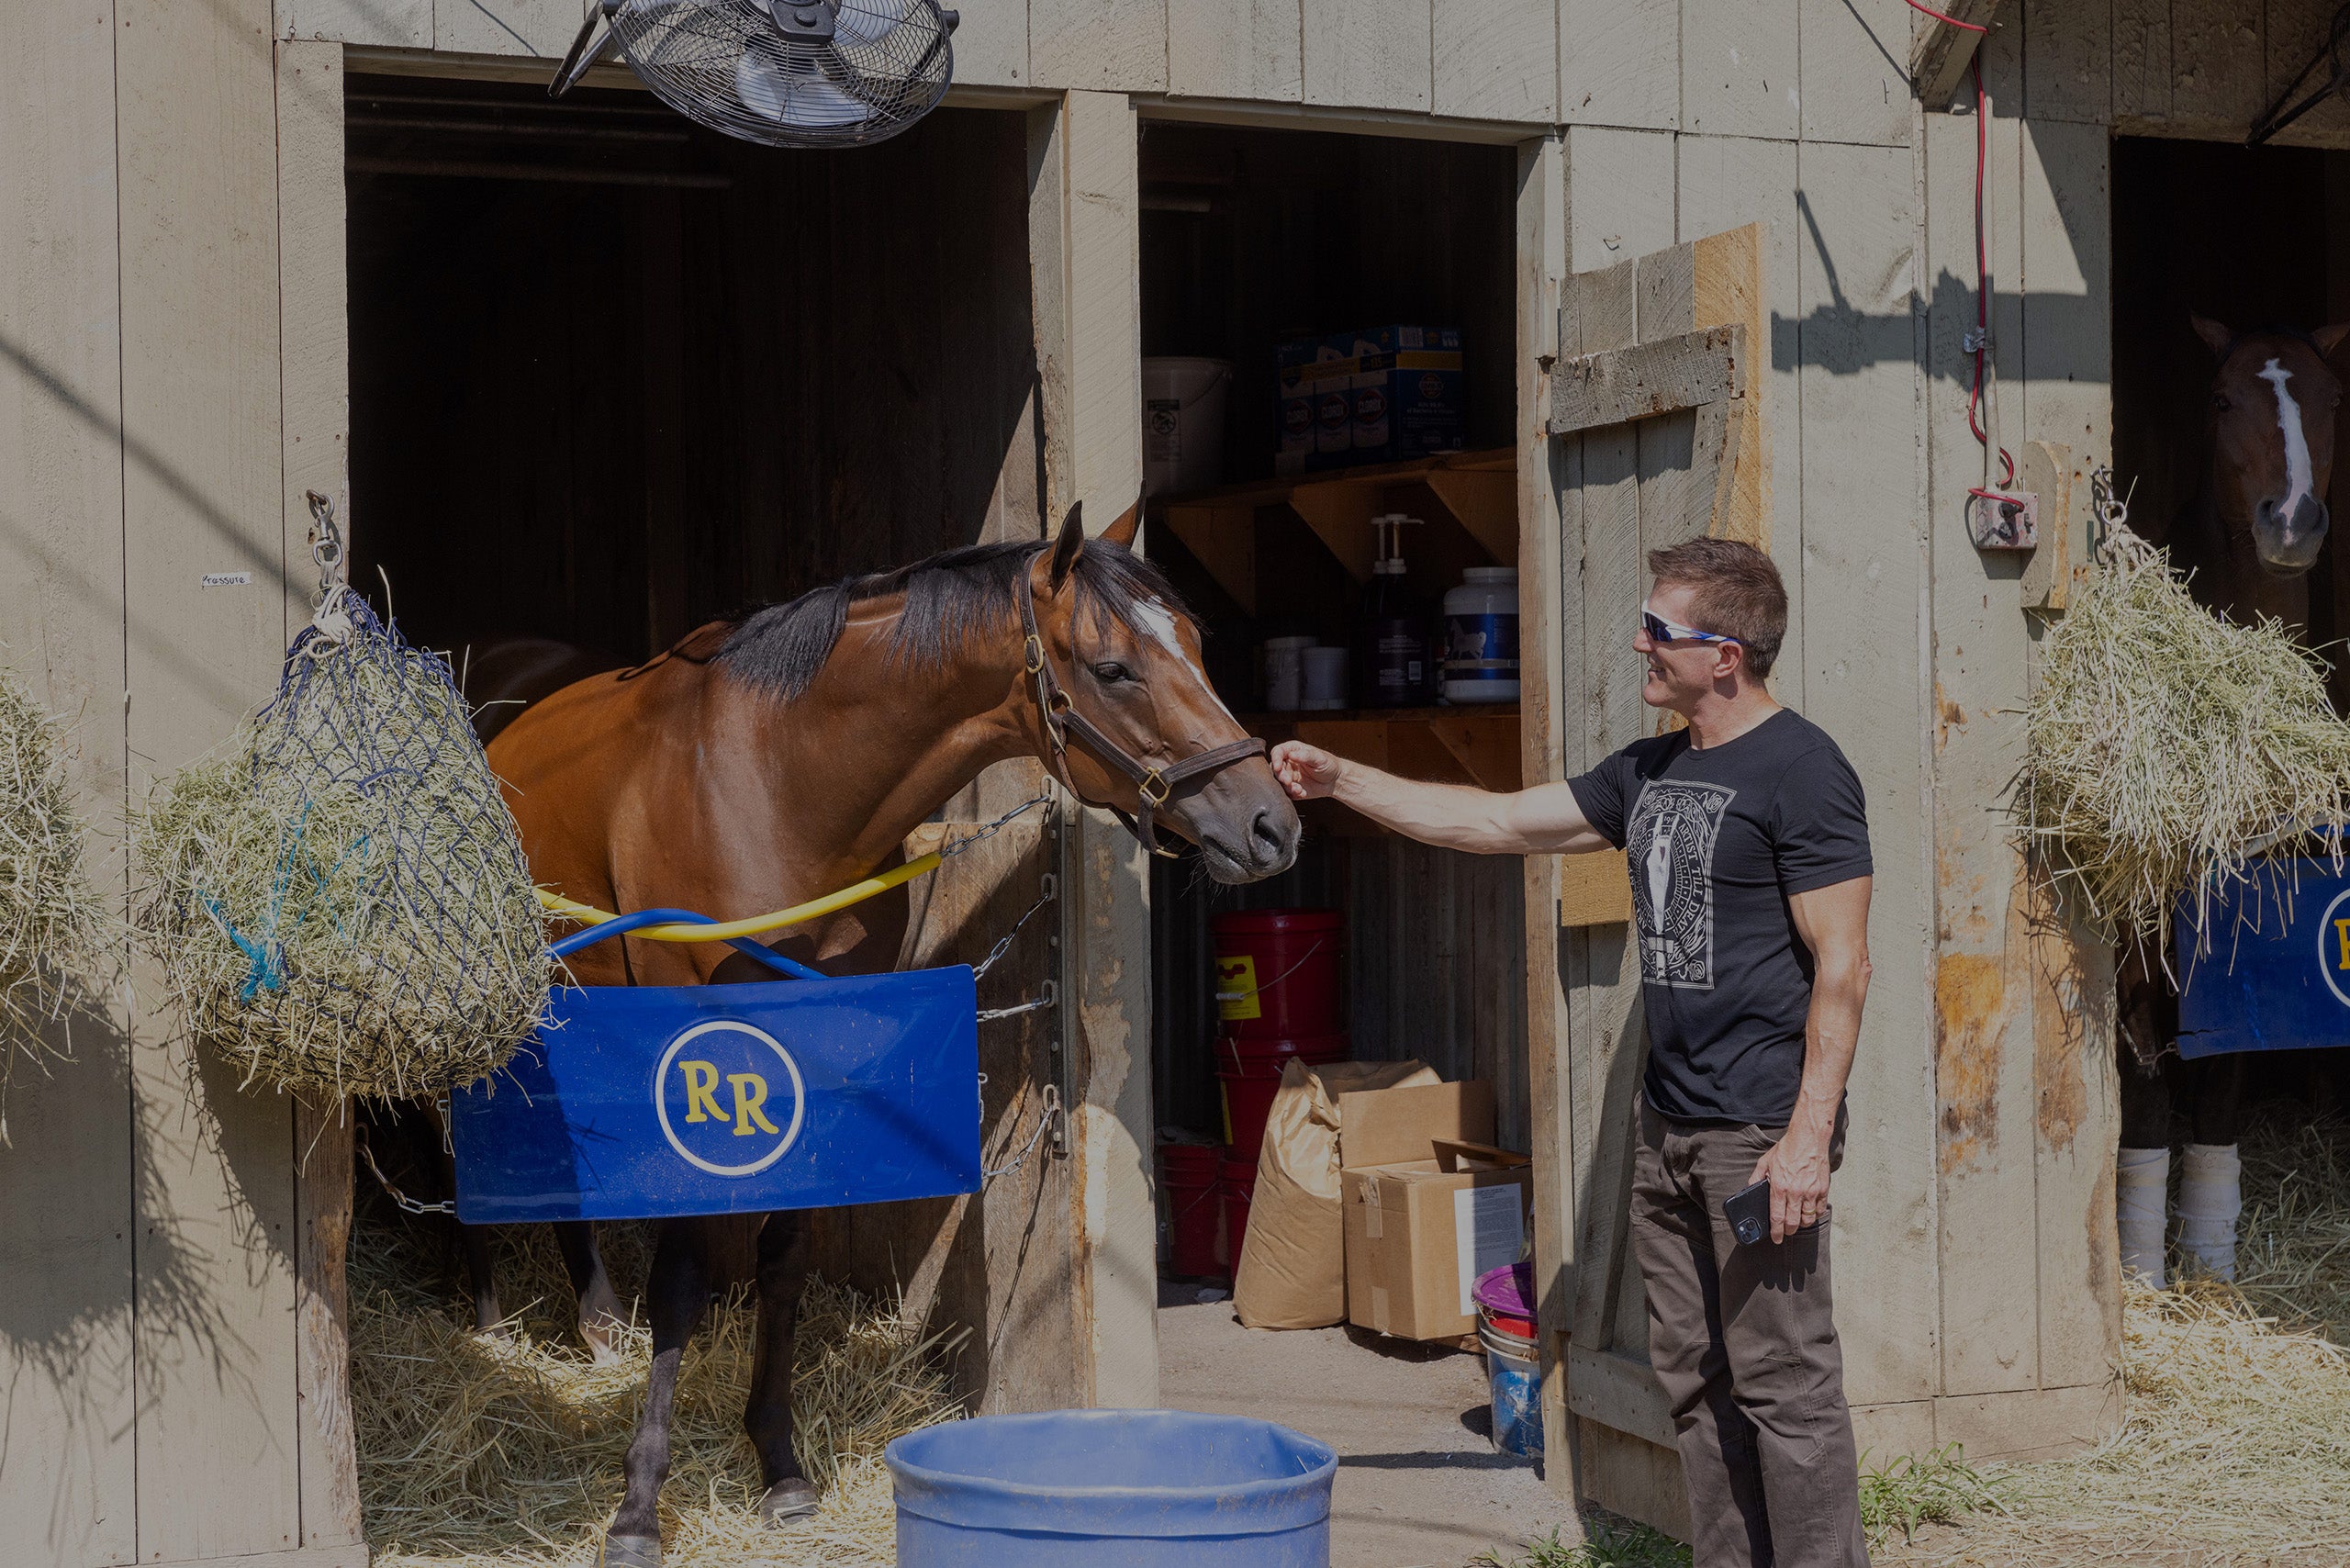 Artist Tom Myott standing beside a stable, gently petting a racehorse. The horse, with a sleek bay coat, is partly inside the stall, which is equipped with hay and other horse care supplies. Myott, appears relaxed and engaged with the horse, capturing a moment of connection between the animal and the artist known for his equine paintings.